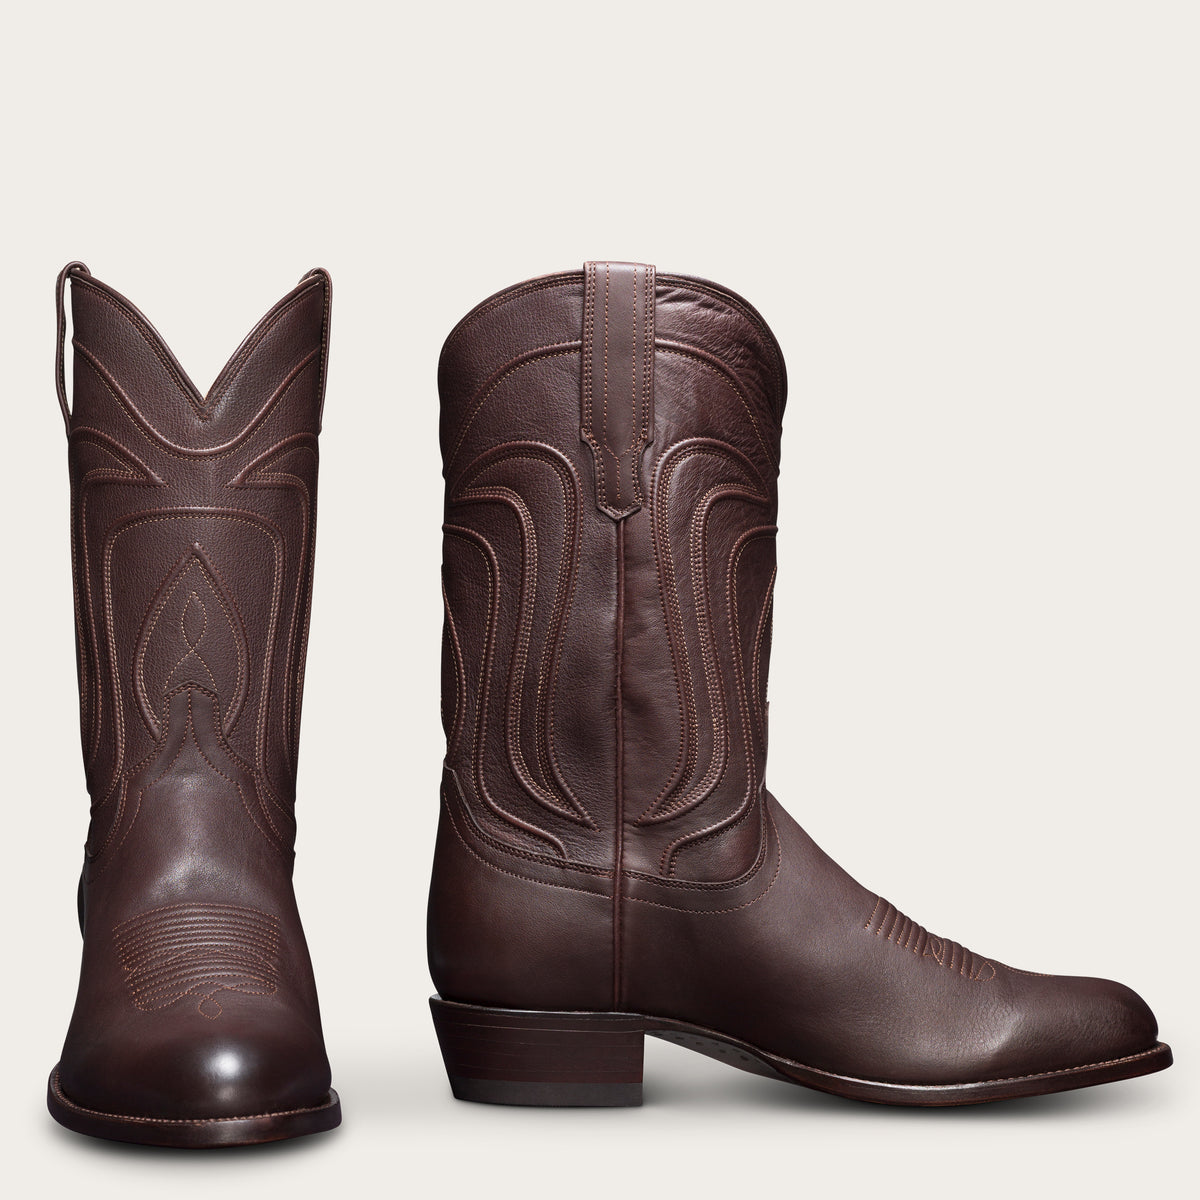 cowboy boots for wide feet and calves